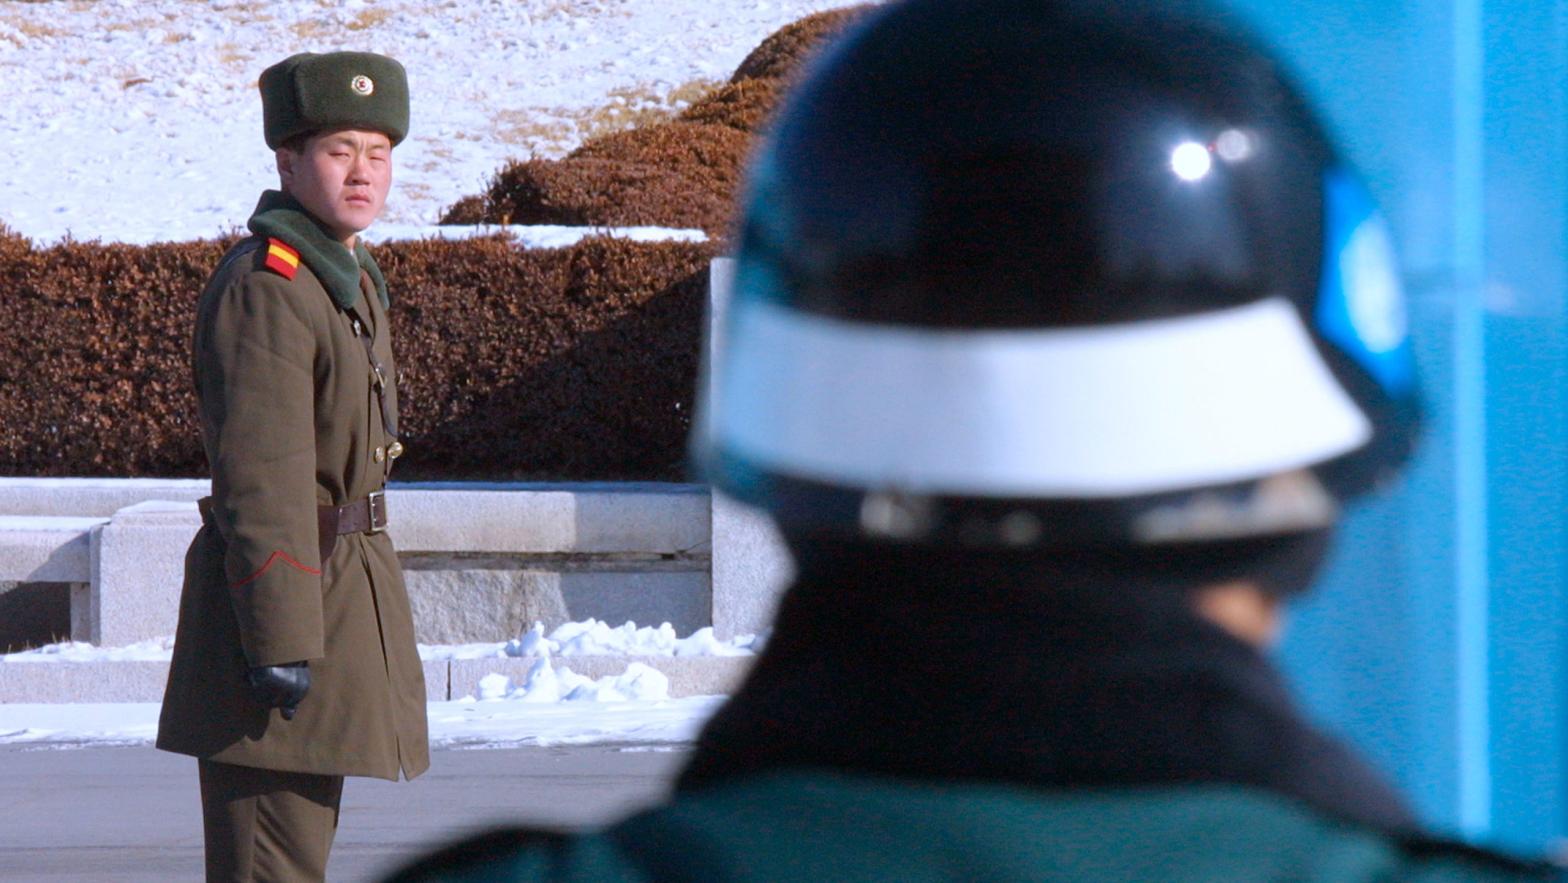 A North Korean soldier watches South Korean soldiers on January 29, 2003, as he stands at the site of the signing of the 1953 armistice.  (Photo: Chung Sung-Jun, Getty Images)